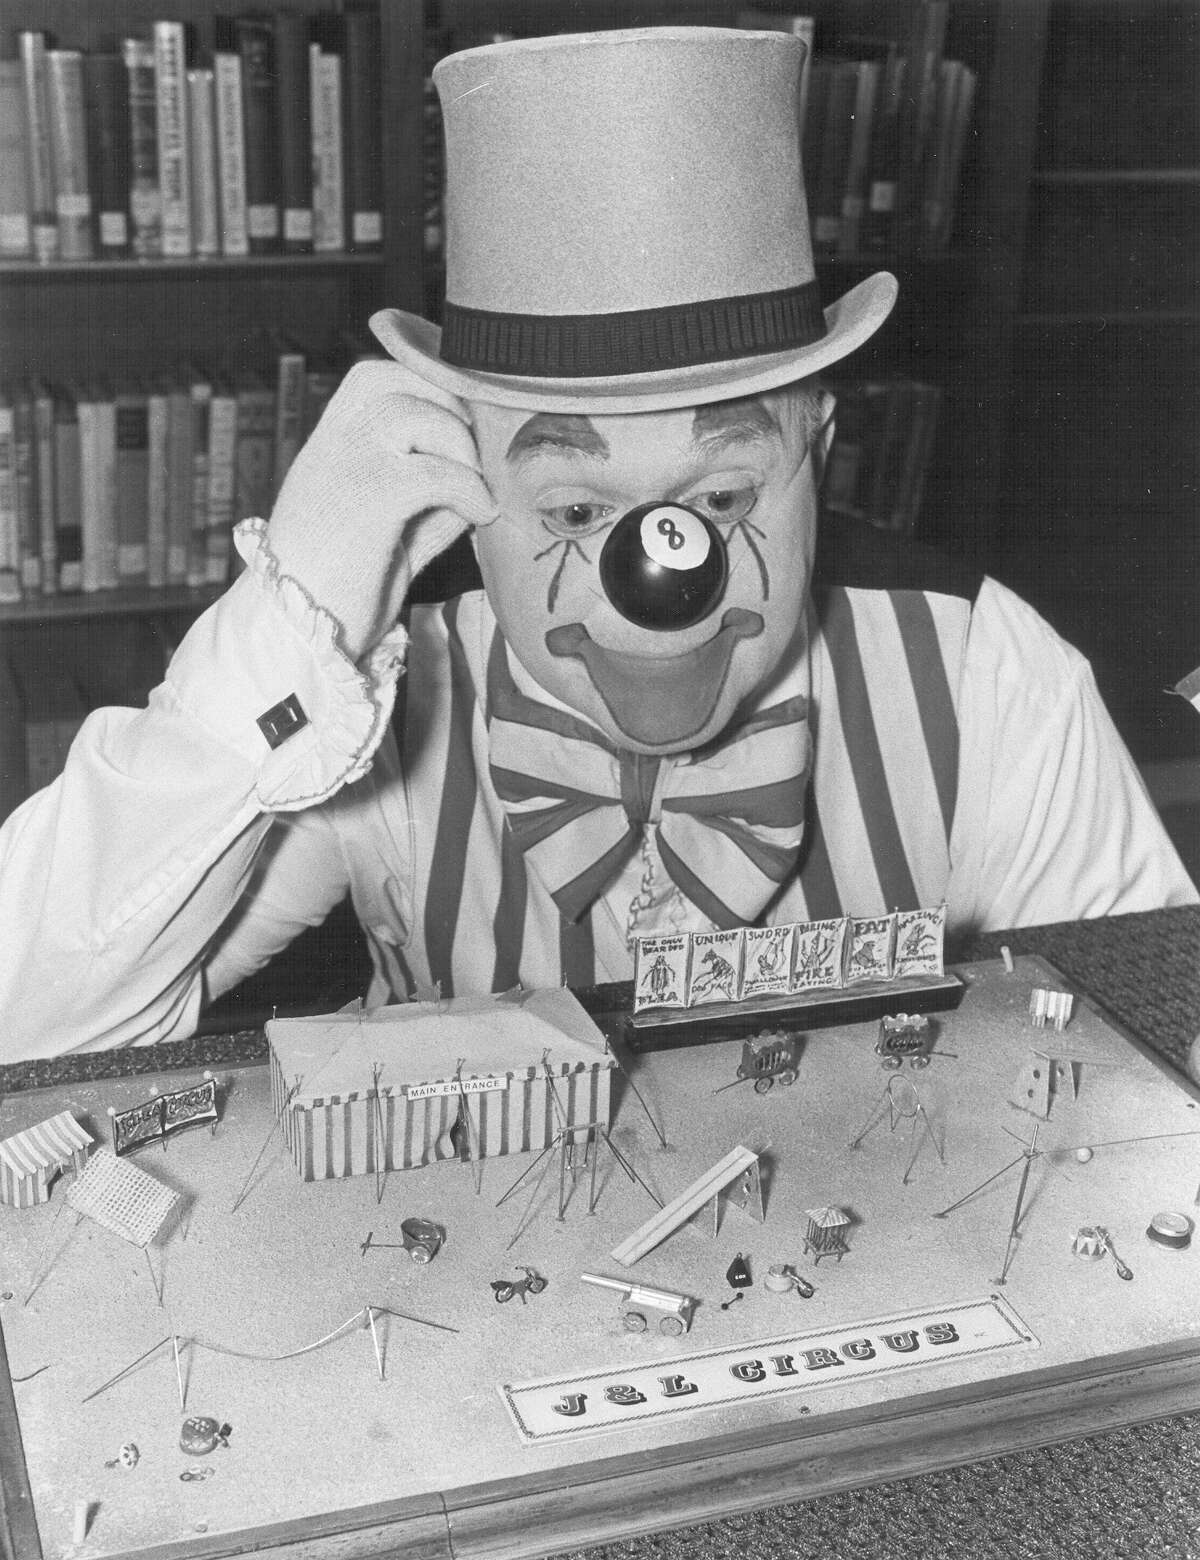 Eight Ball the clown poses with his flea circus at the Hertzberg Circus Museum on Oct. 17, 1989.